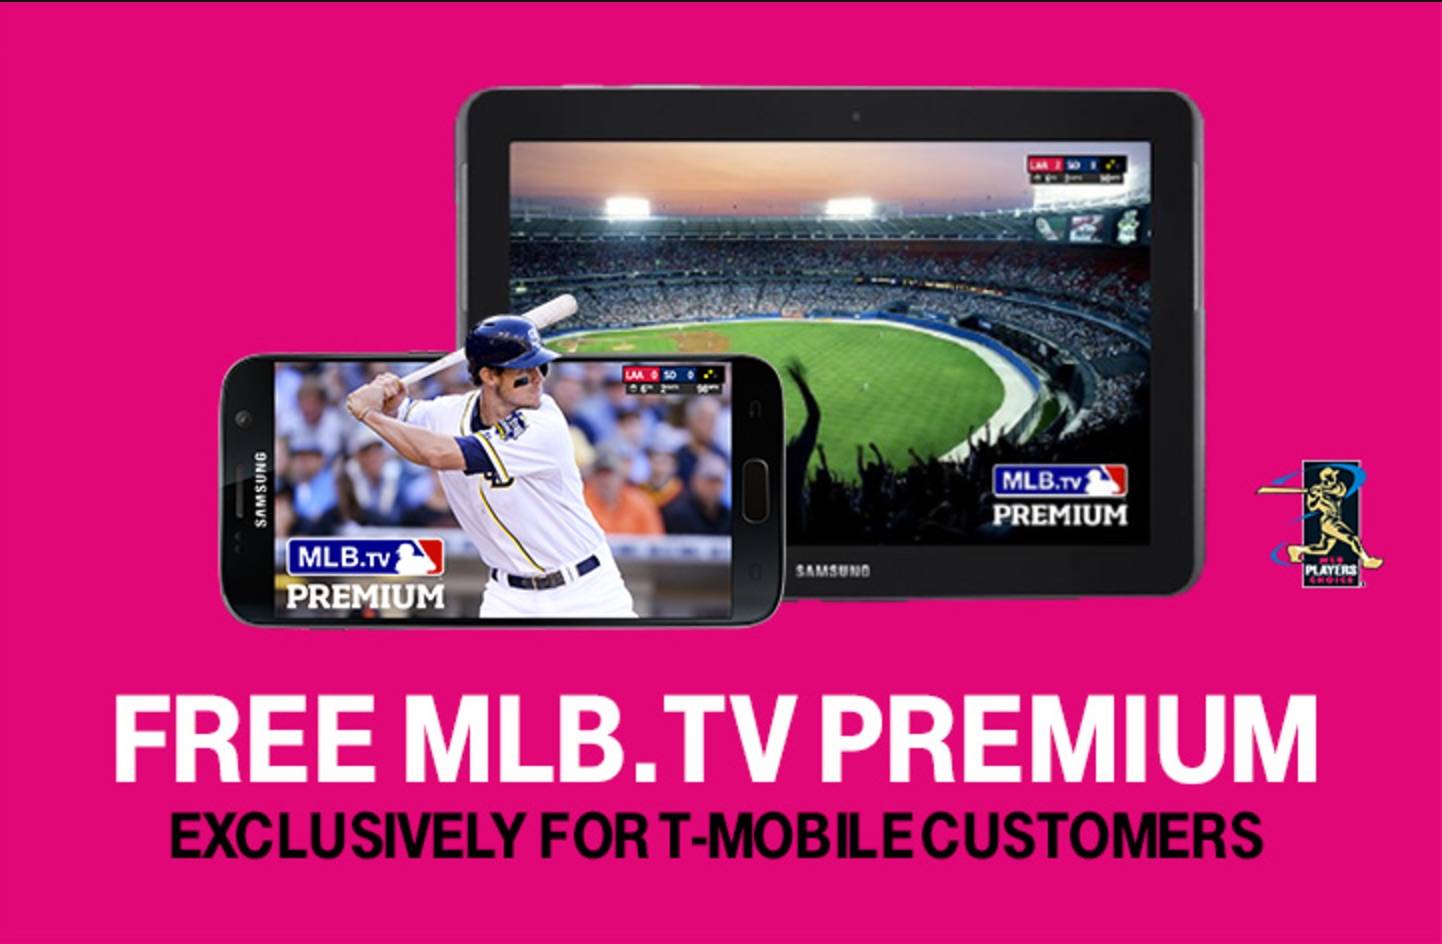 TMobile giving away free MLB.TV Premium for Get Thanked Tuesday